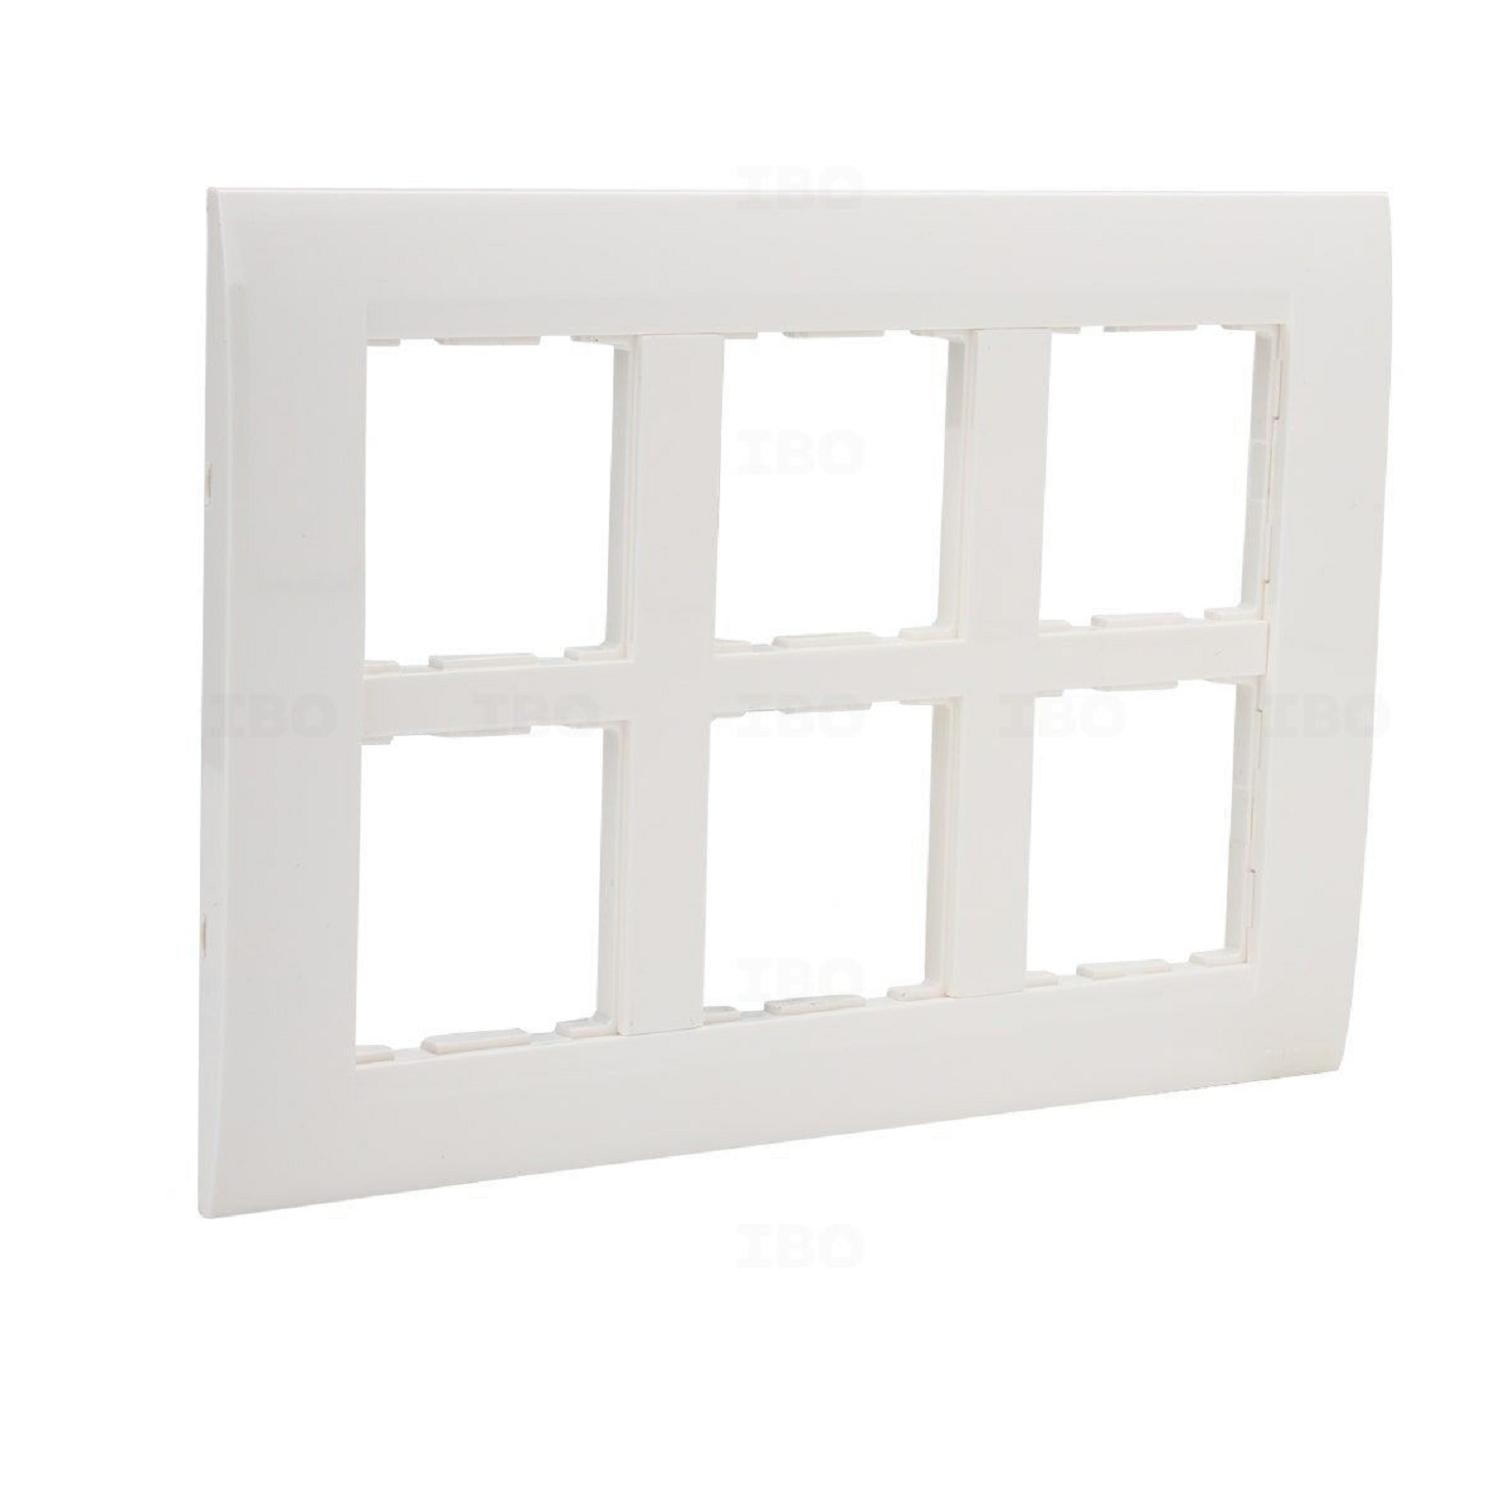 GreatWhite Fiana 12 Module Cover Plate with Base Frame - White